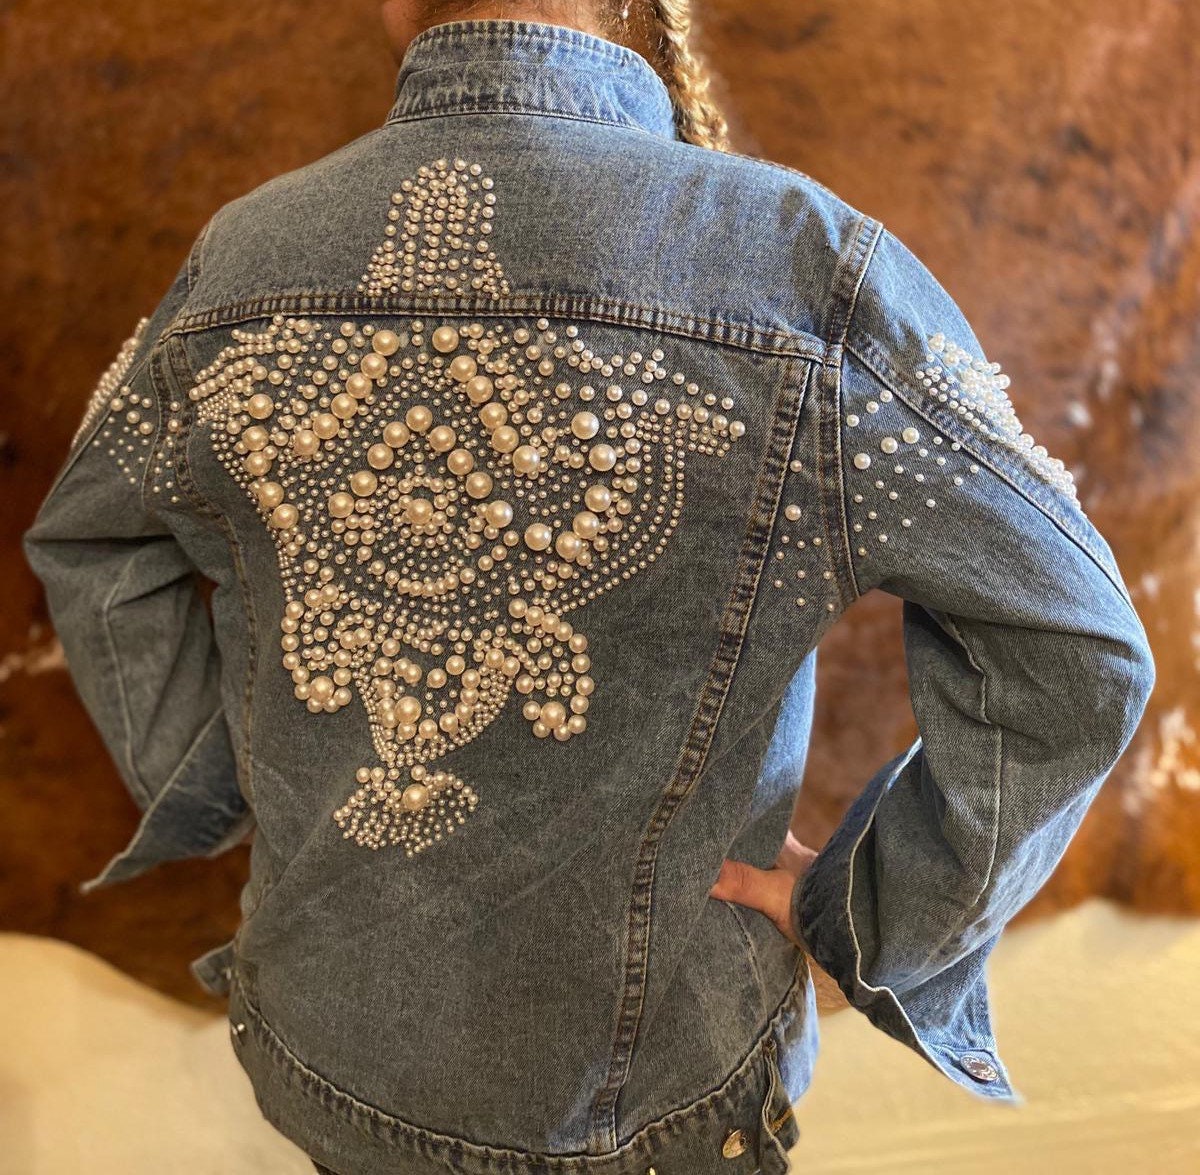 Denim Pearl Jacket Embellished with White Pearls all Thru Back | Etsy